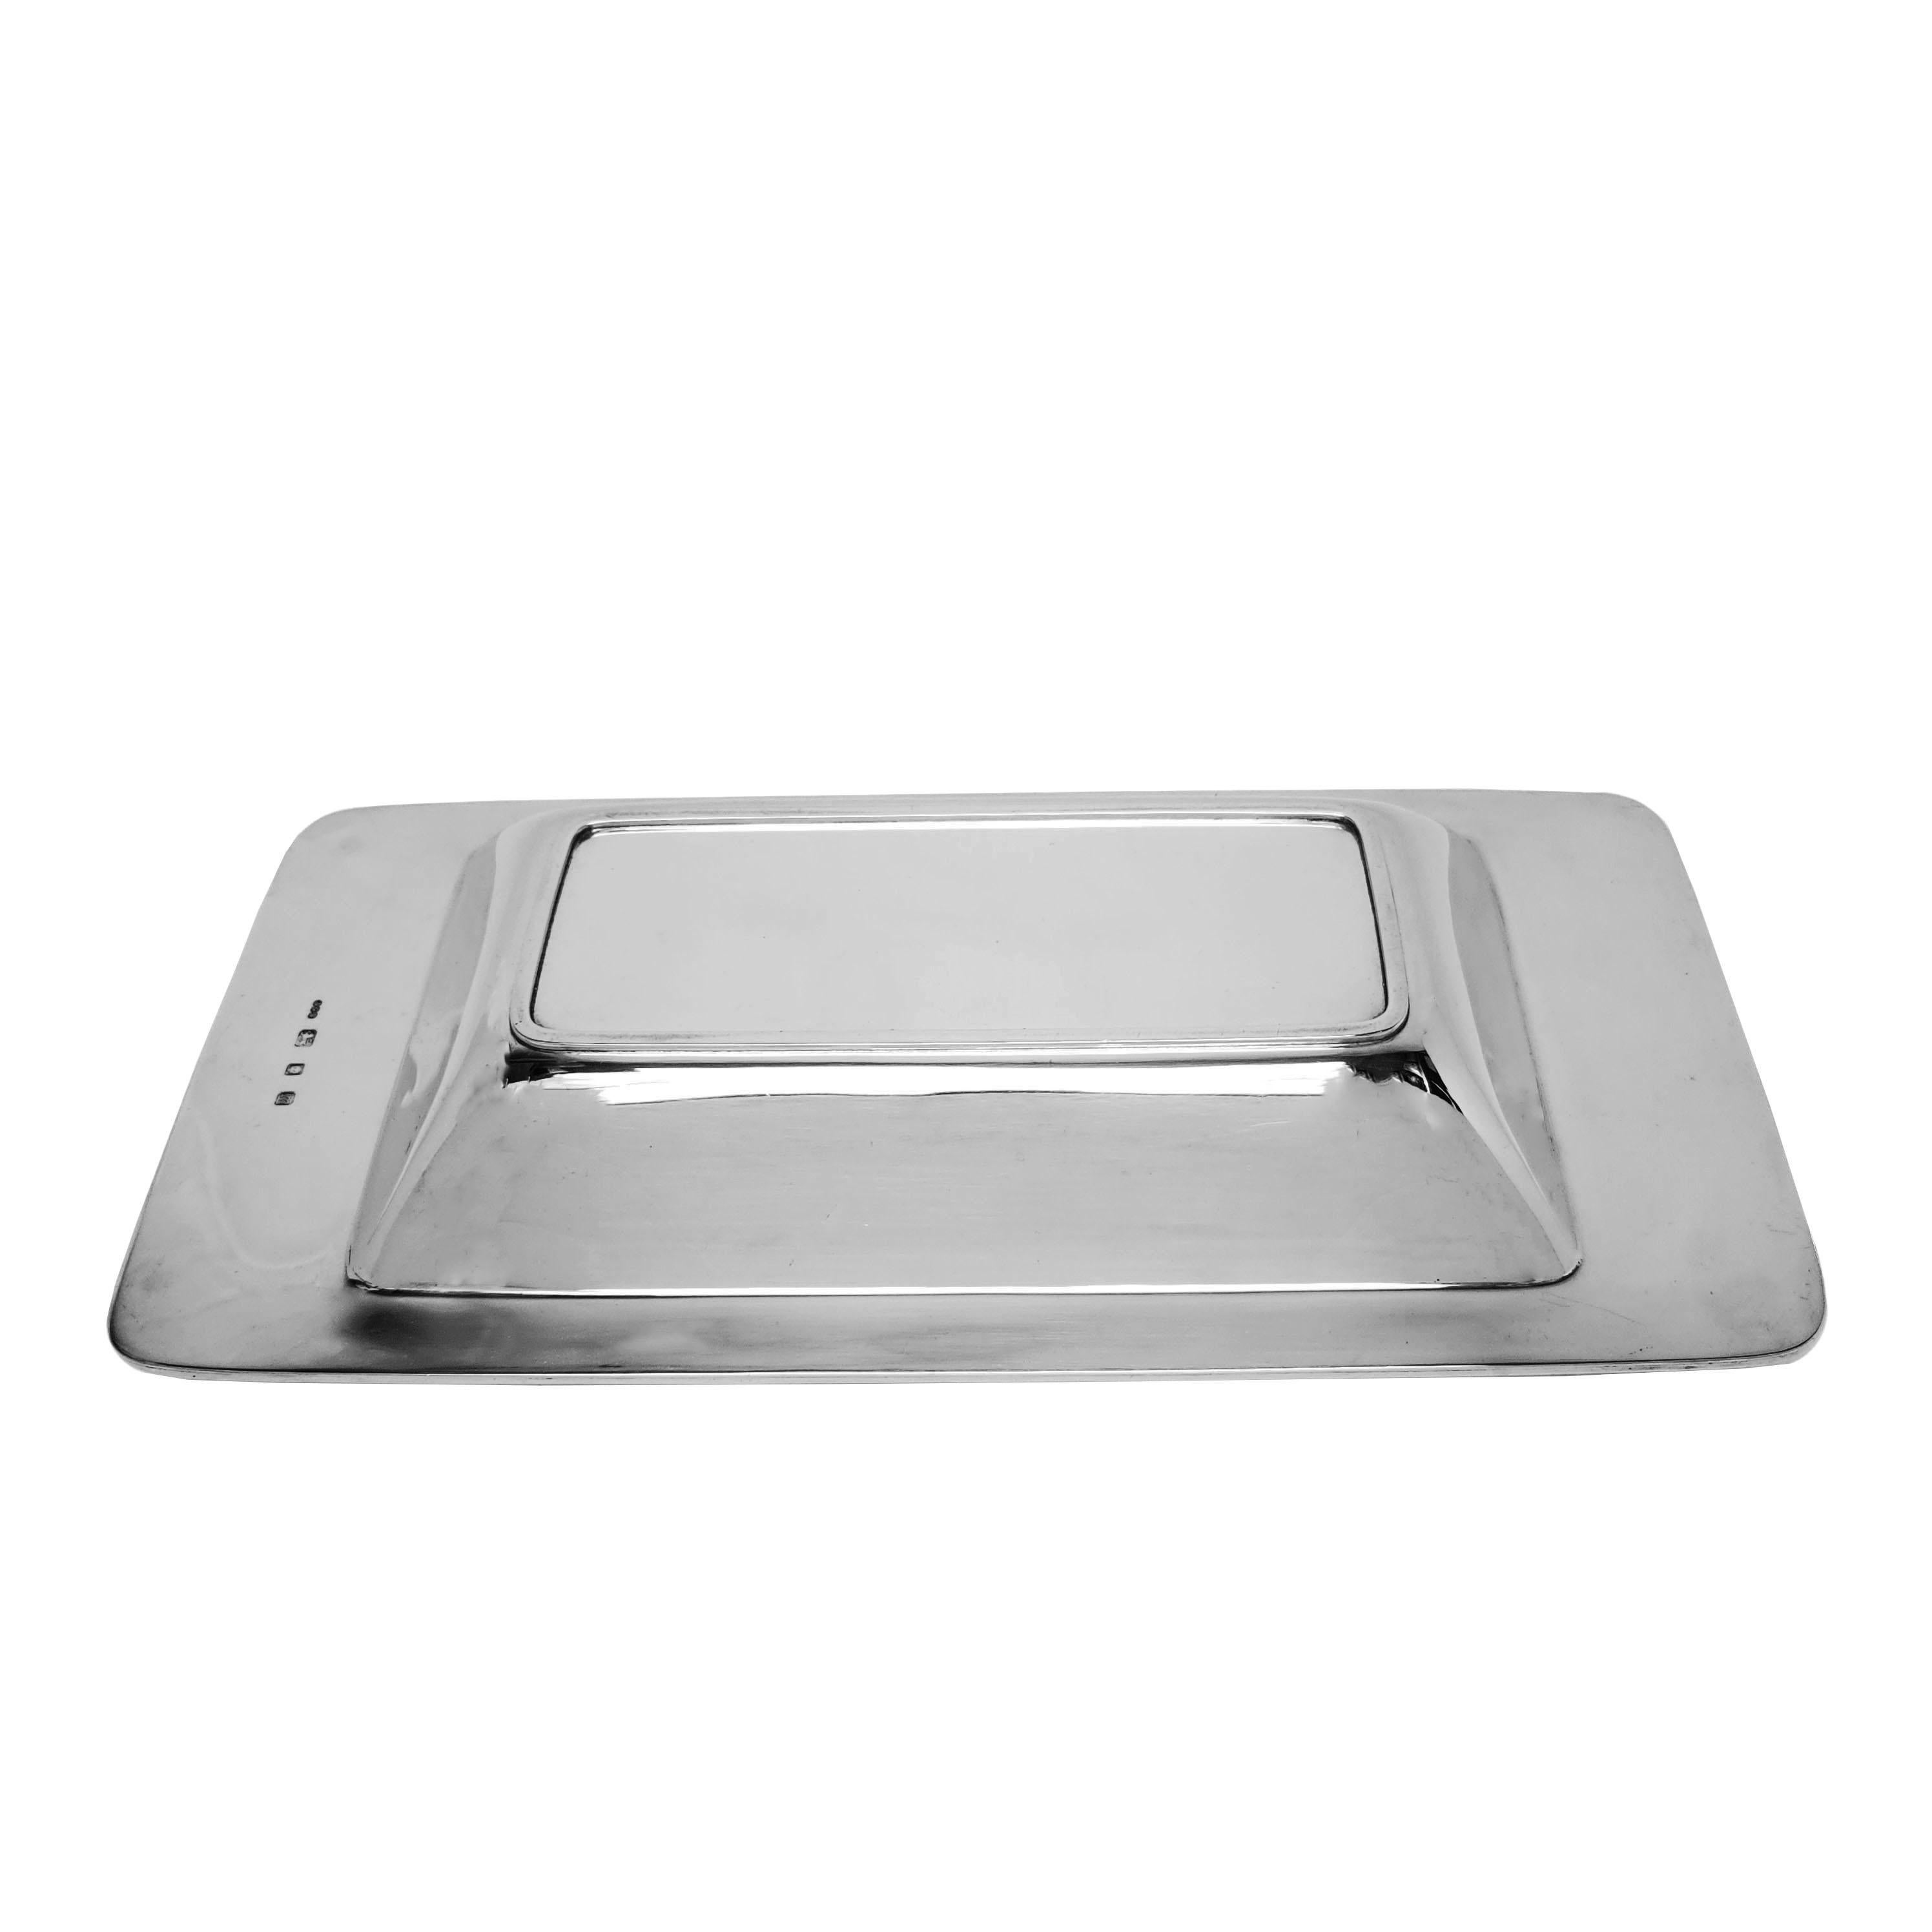 A pair of magnificent Gerald Benney Entree Dishes with an elegant, understated rectangular design. The fitted lid can be inverted for use as a serving dish if desired. These Silver Vegetable Serving Dishes have a modern design and a highly polished